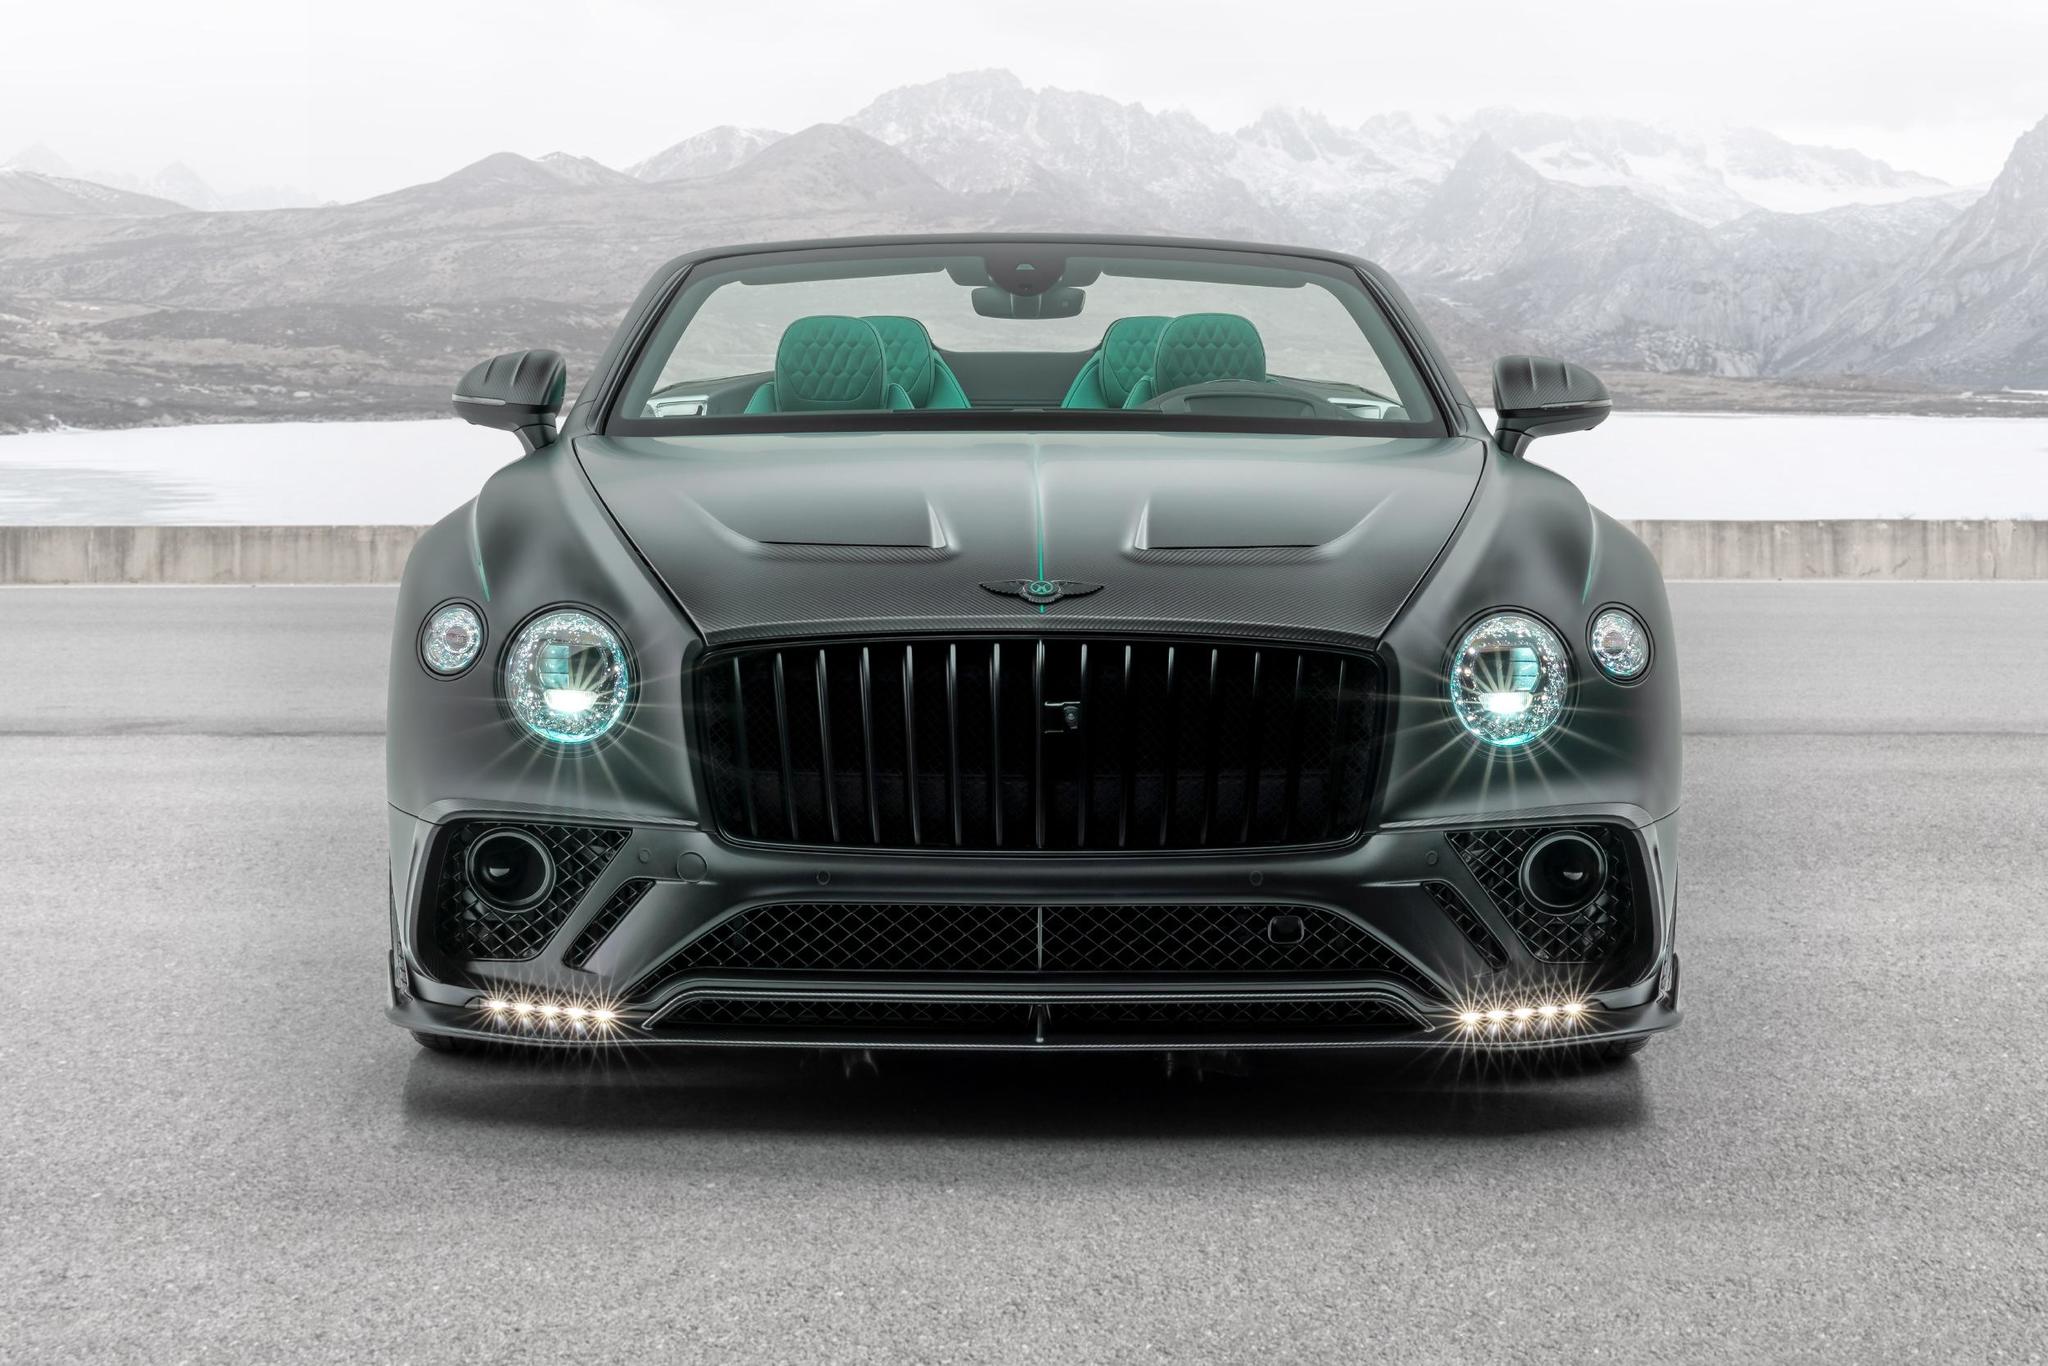 Mansory body kit for Bentley Continental GT latest model